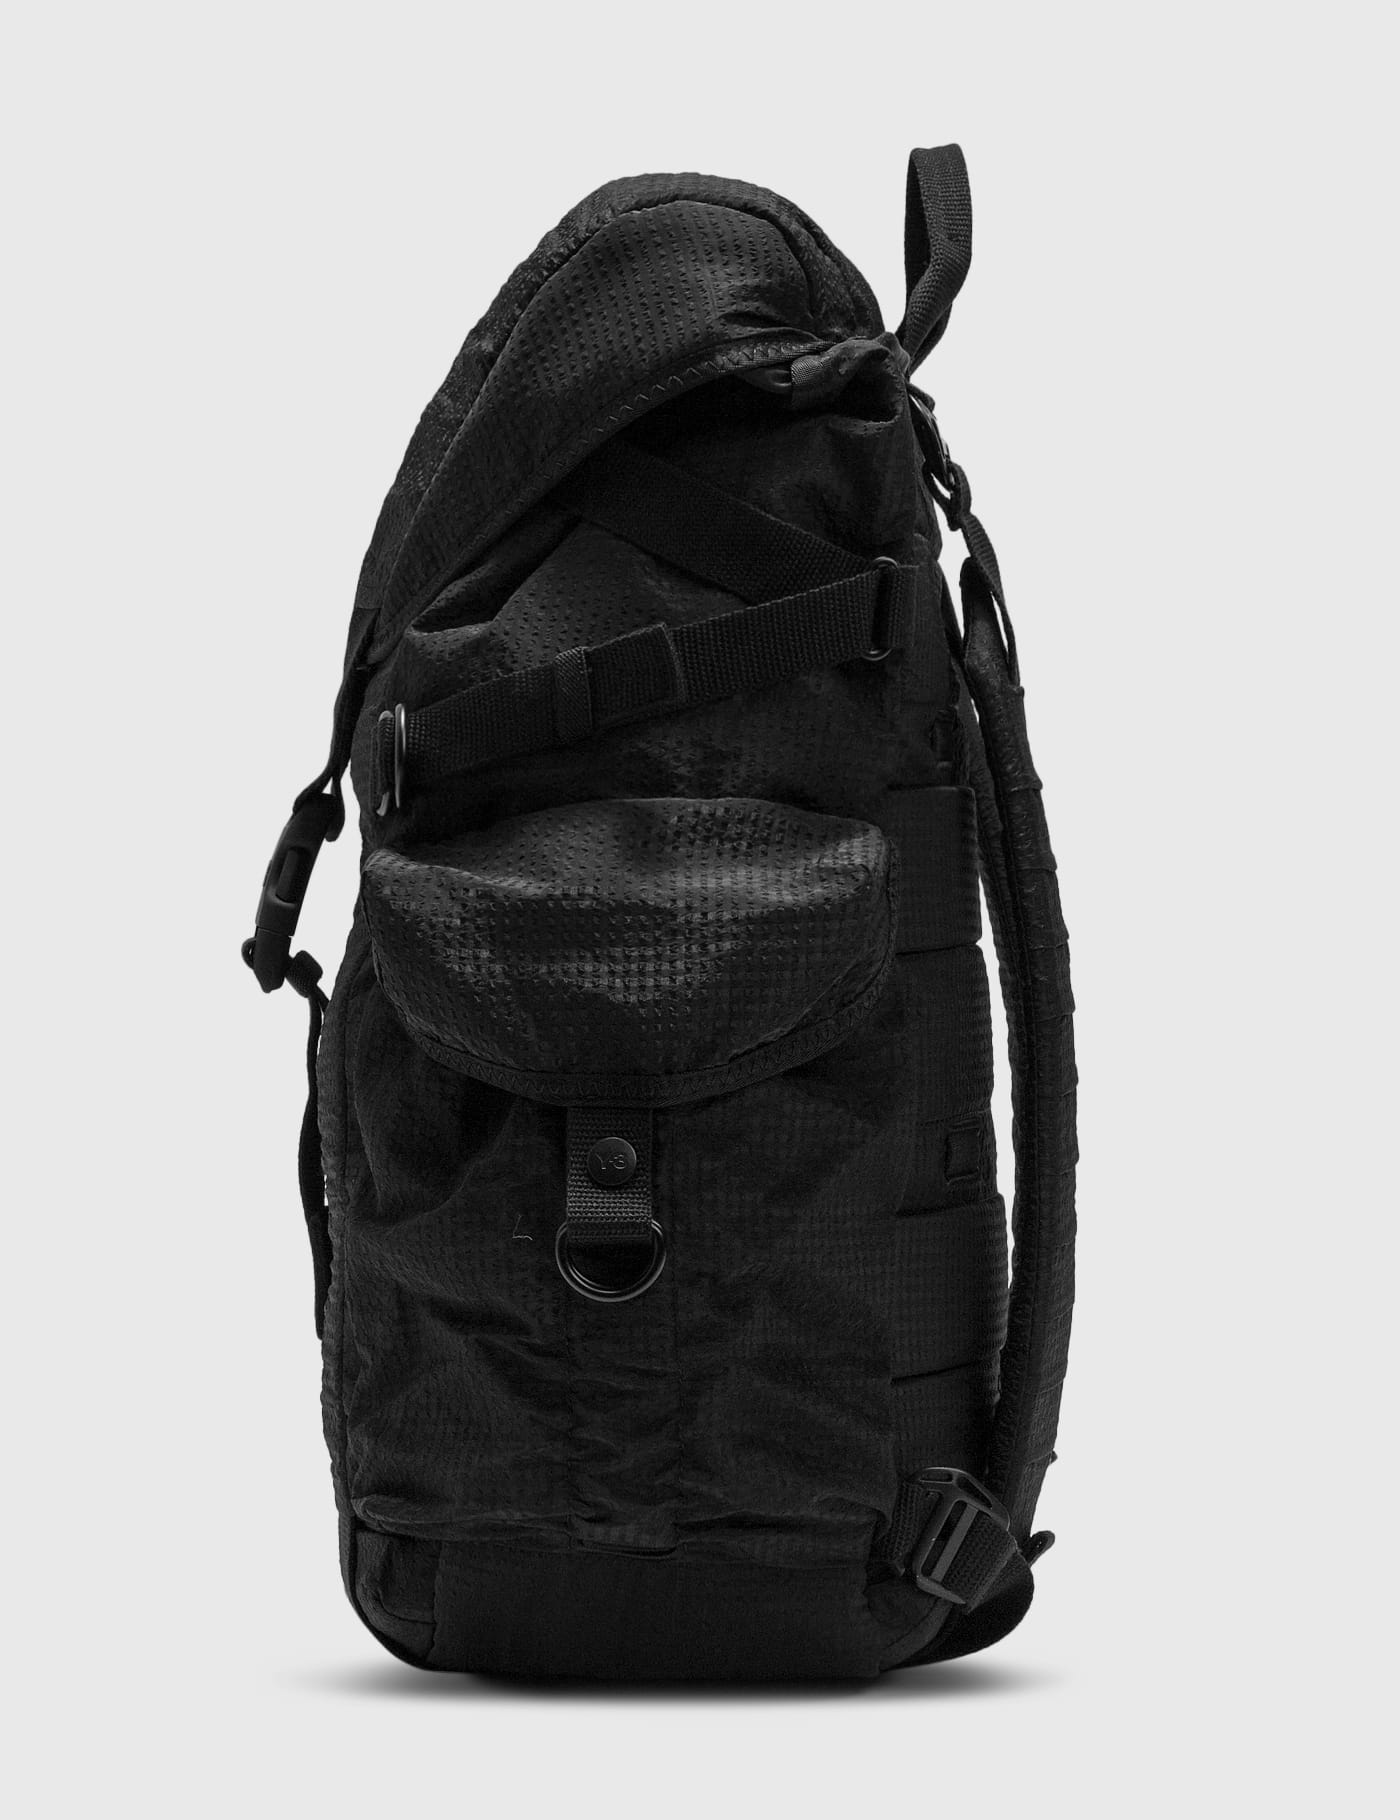 CH2 Utility Backpack